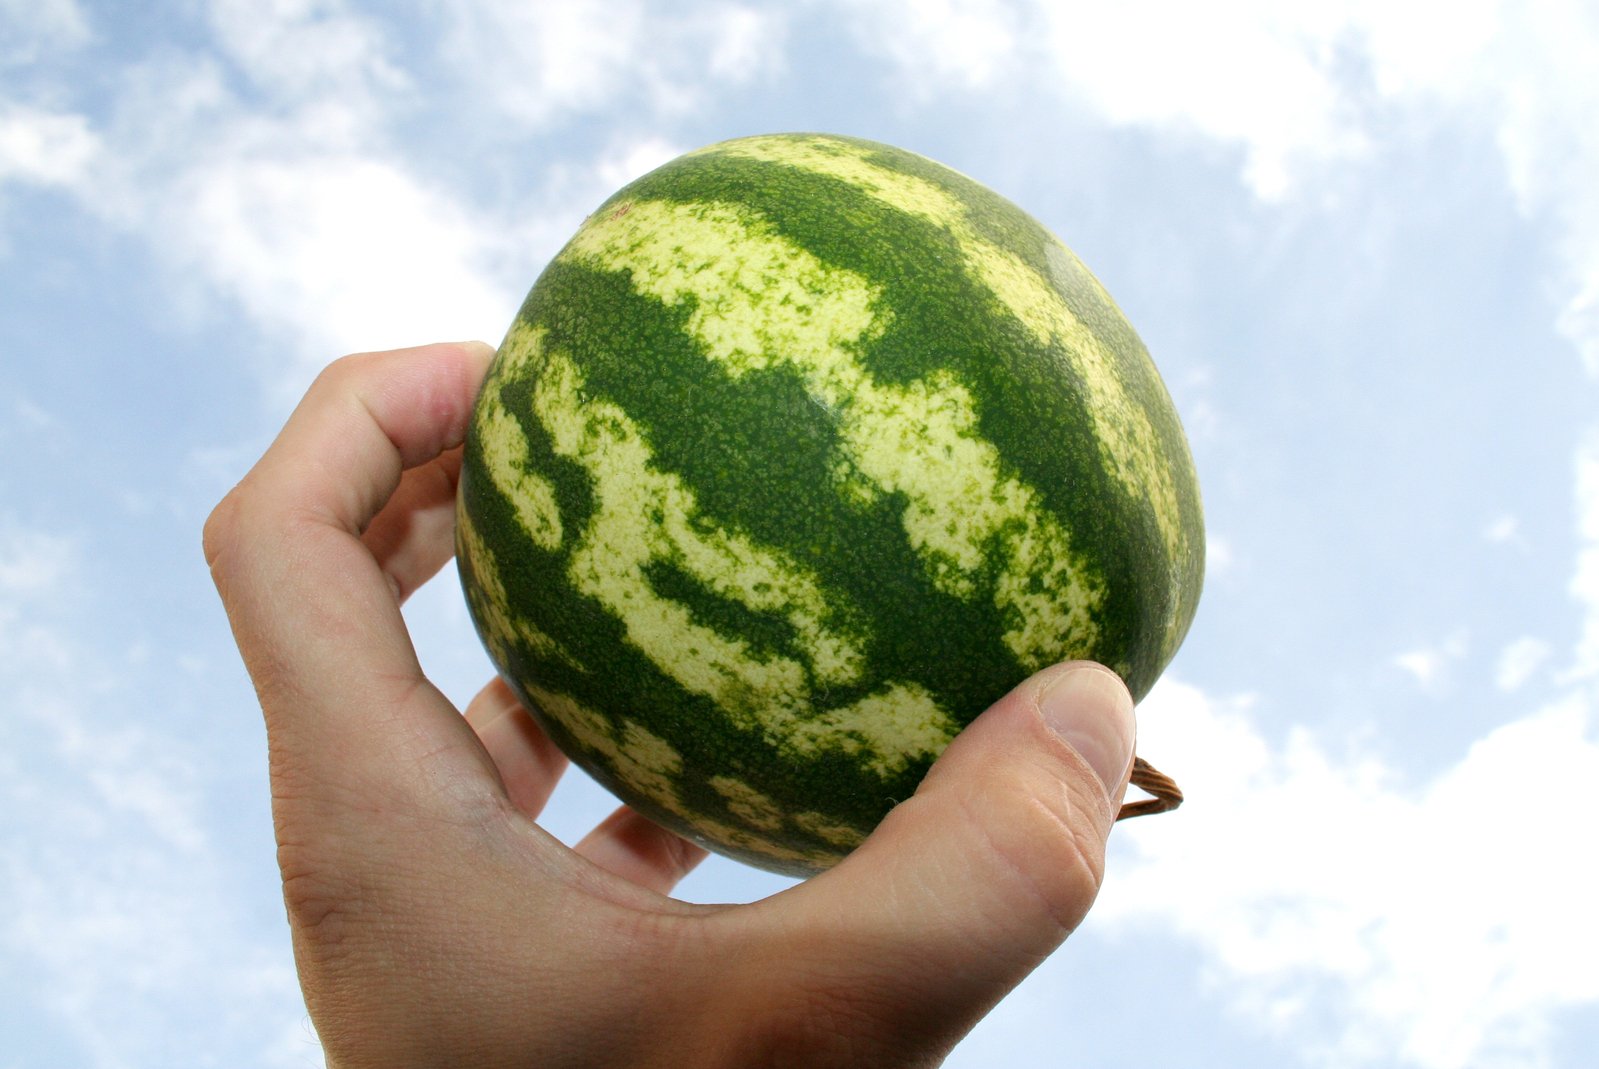 a person is holding up an apple shaped like a watermelon